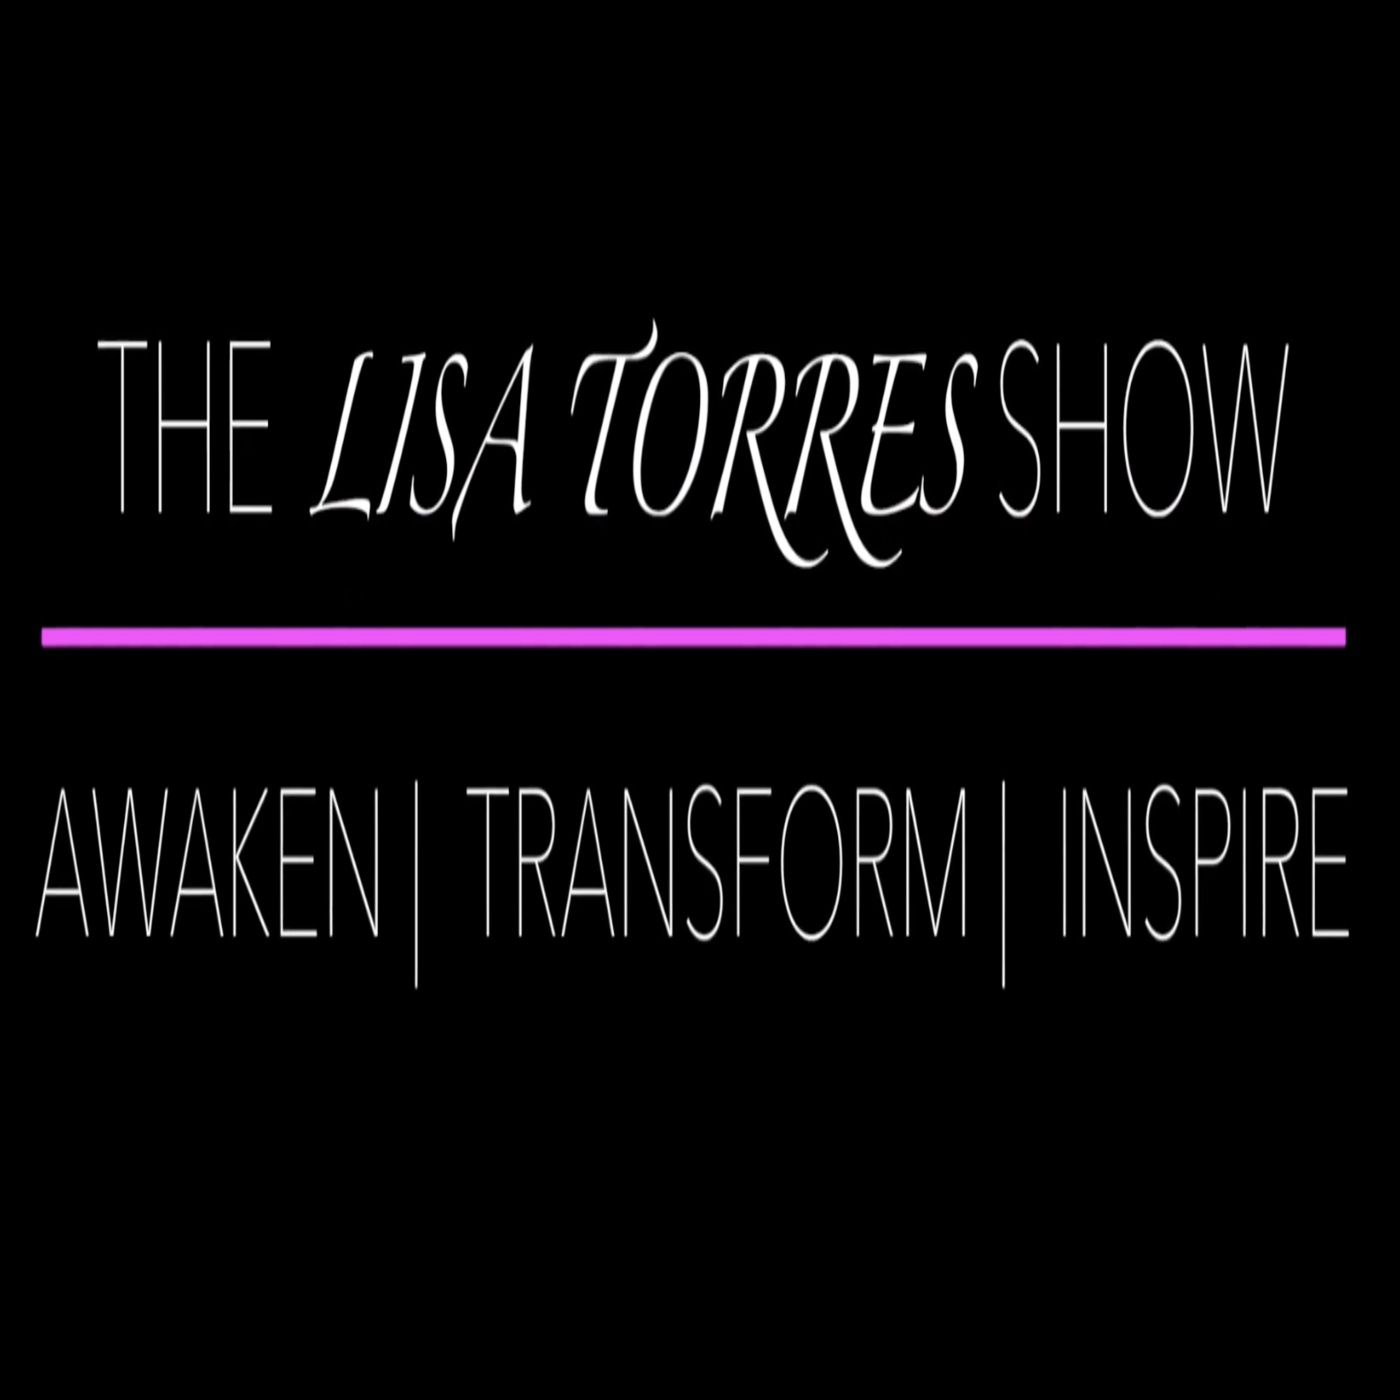 THE LISA TORRES SHOW